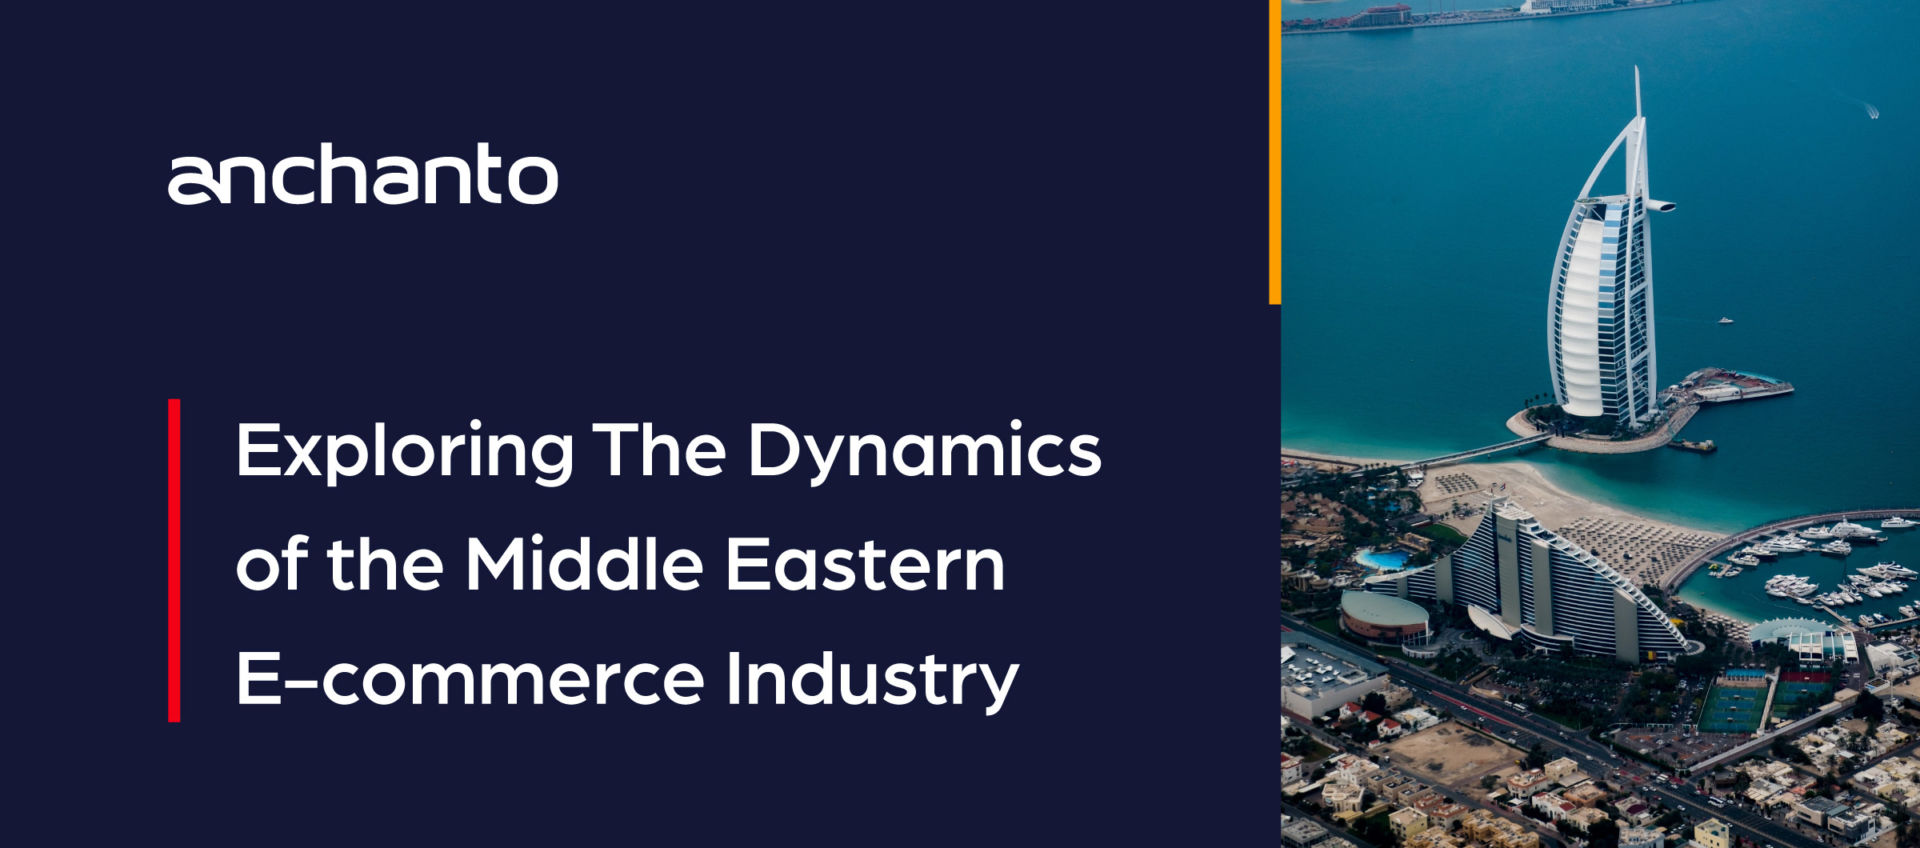 Exploring The Dynamics of the Middle Eastern E-commerce Industry